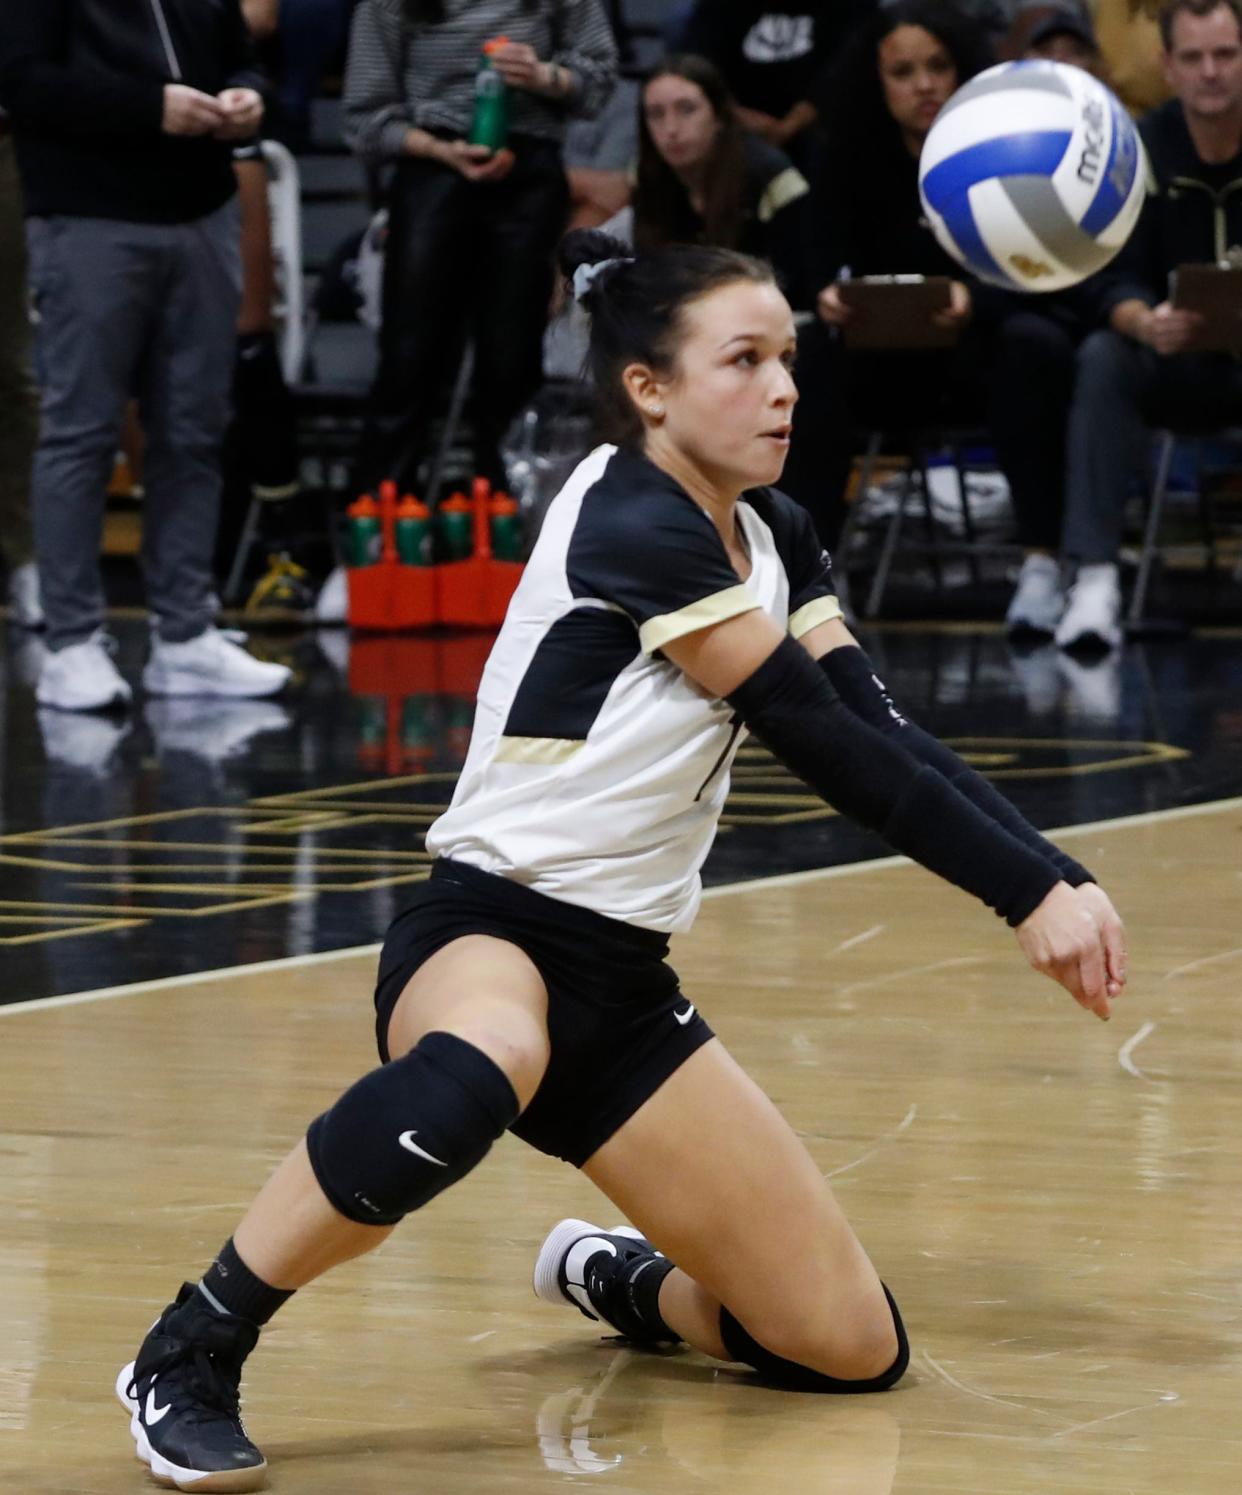 Purdue Boilermakers Ava Torrance (1) hits the ball during the NCAA volleyball match against the Nebraska Cornhuskers, Wednesday, Oct. 19, 2022, at Holloway Gymnasium in West Lafayette, Ind. Nebraska won 3-0.